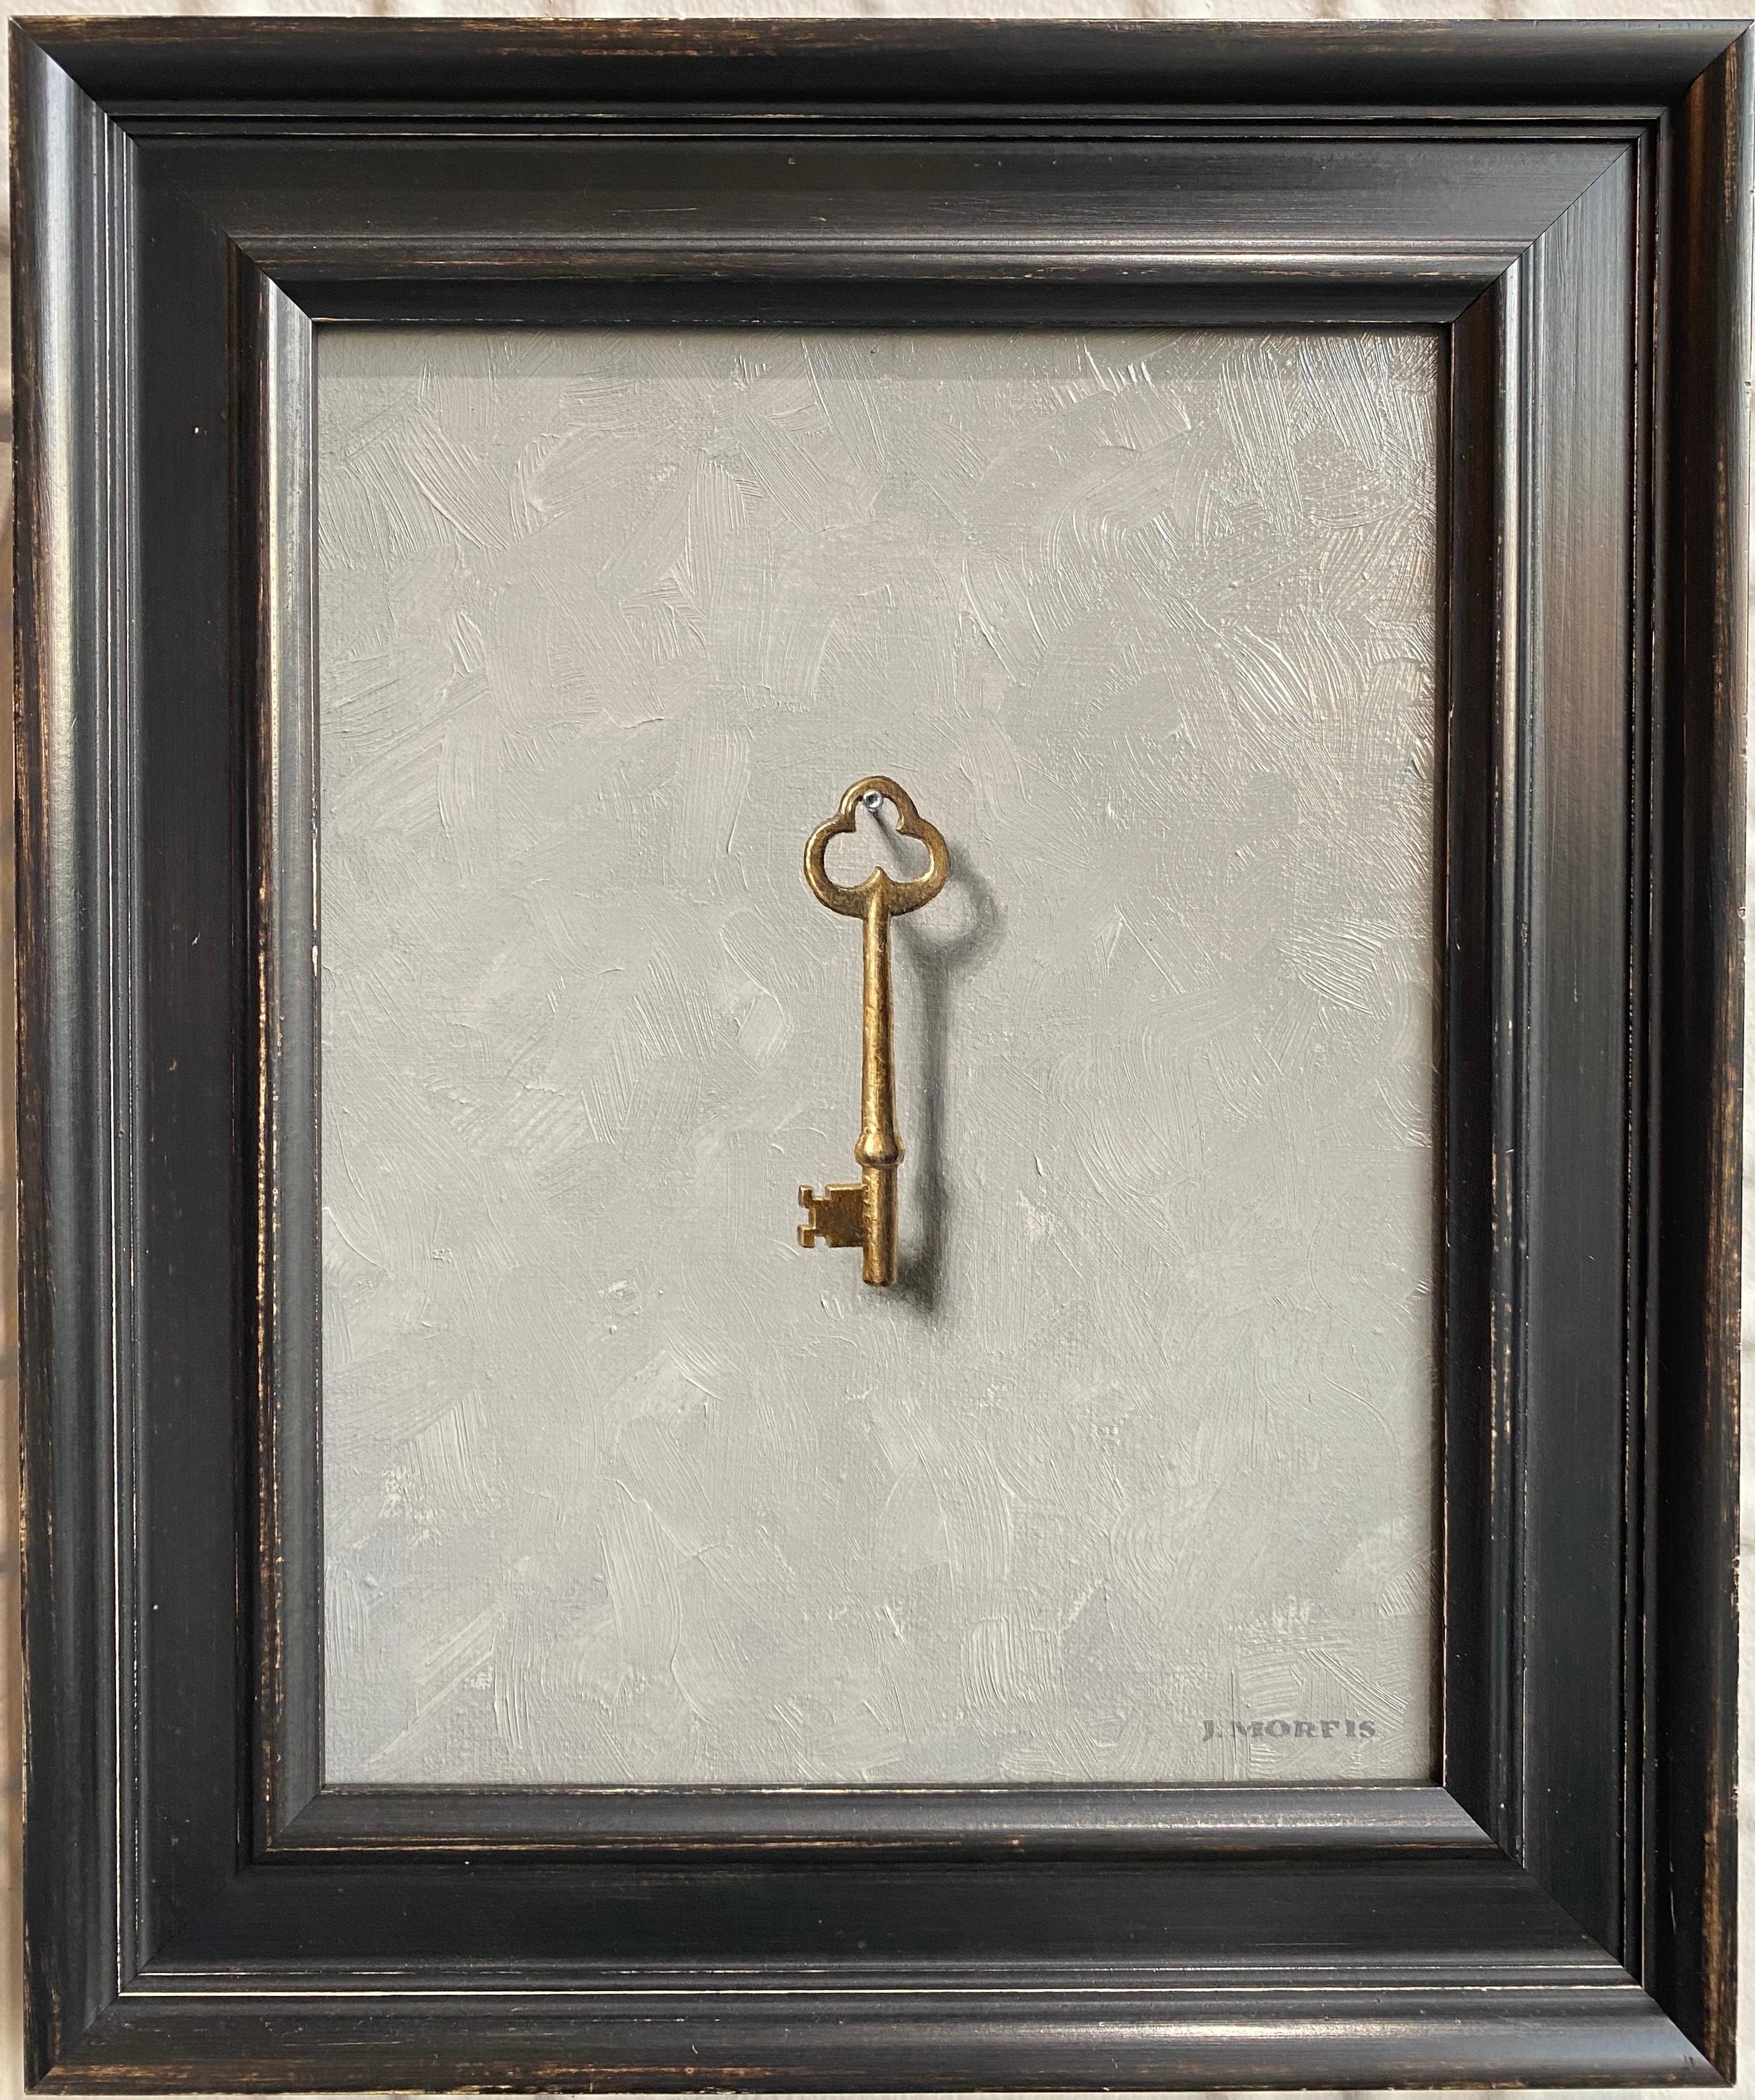 Uncle's Gold Key - Painting by John Morfis